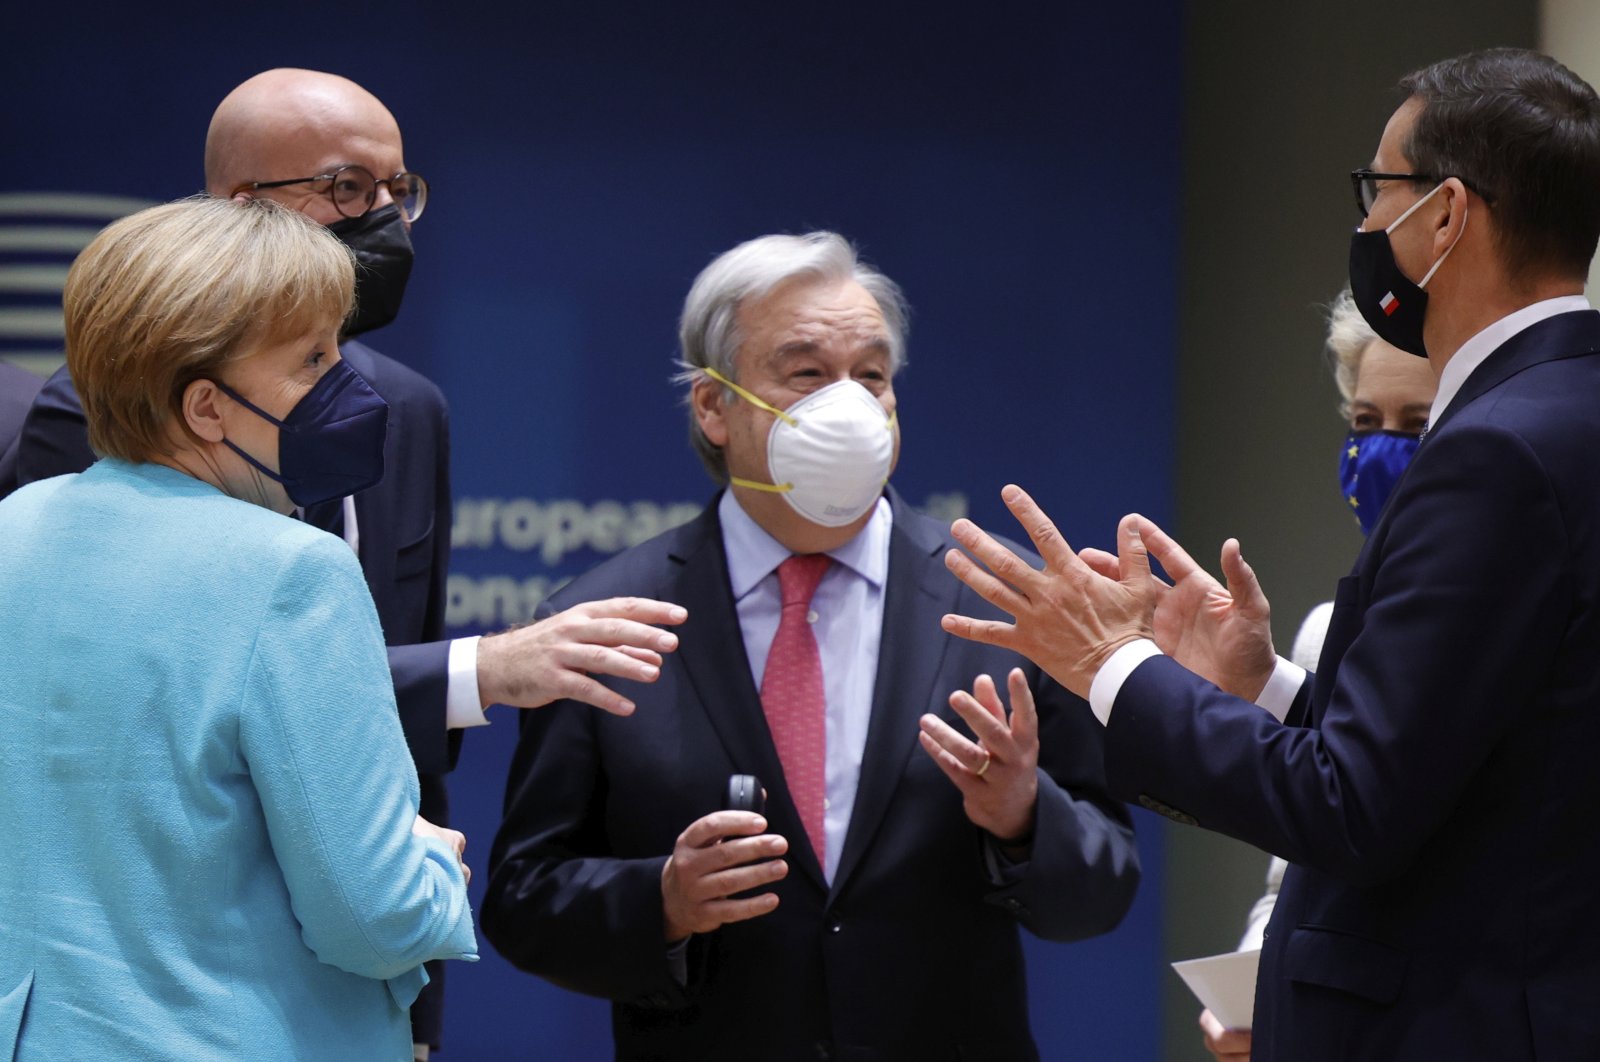 United Nations Secretary-General Antonio Guterres (C) talks to European Council President Charles Michel (2-L), Germany's Chancellor Angela Merkel (L), European Commission President Ursula von der Leyen (2-R) and Polish Prime Minister Mateusz Morawiecki (R) during an EU summit at the European Council building in Brussels, Belgium, June 24, 2021. (EPA Photo)